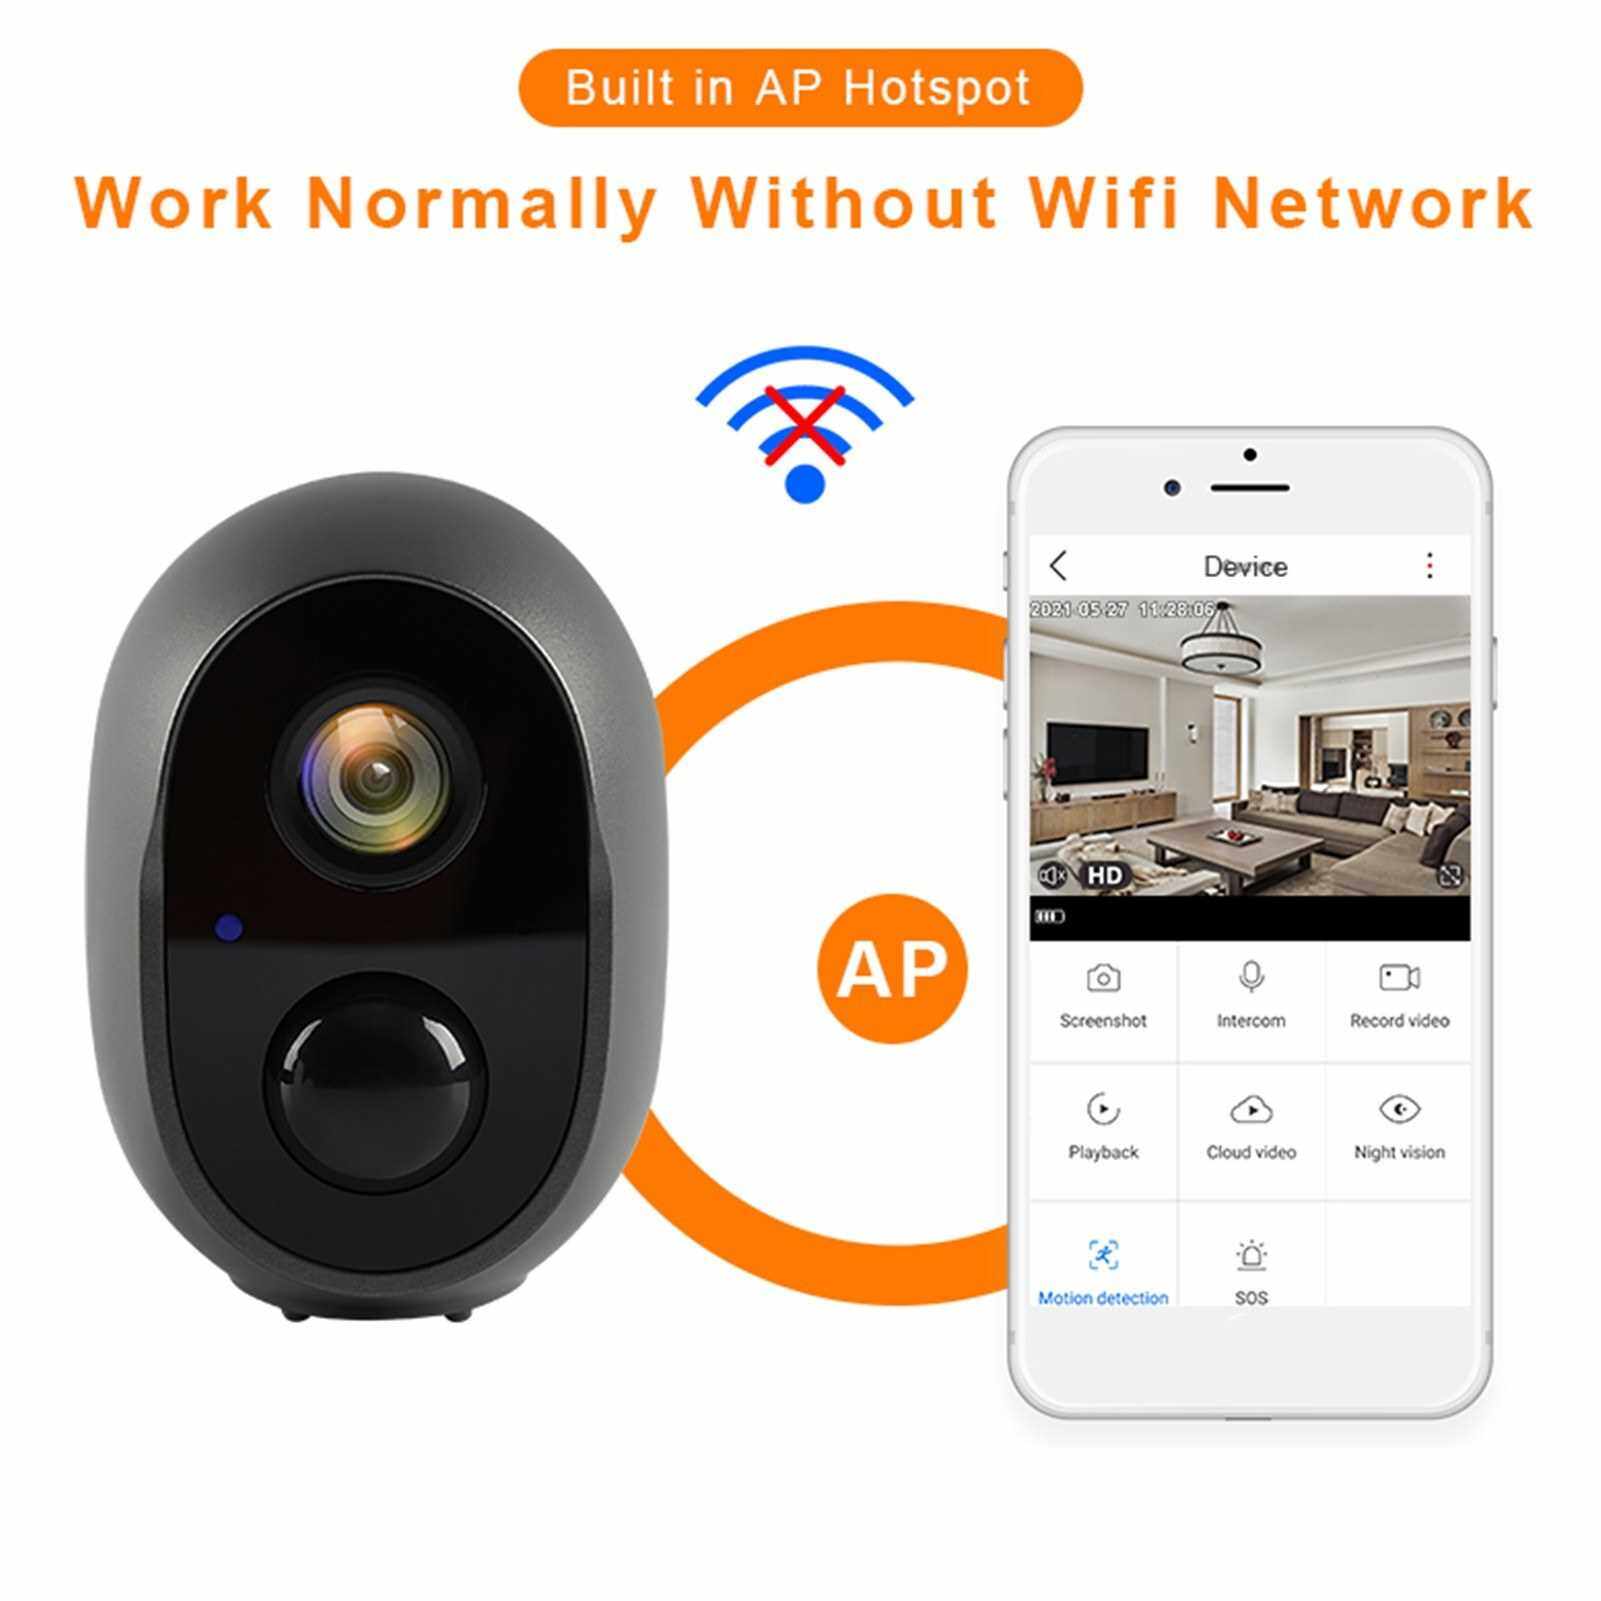 2 MP Rechargeable Battery Security Camera 2.4G WiFi Wireless 1080P Home Surveillance Camera Outdoor with 2-Way Audio/Night Vision/Motion Detection/IP66 Waterproof with 2pcs Batteries (Grey)